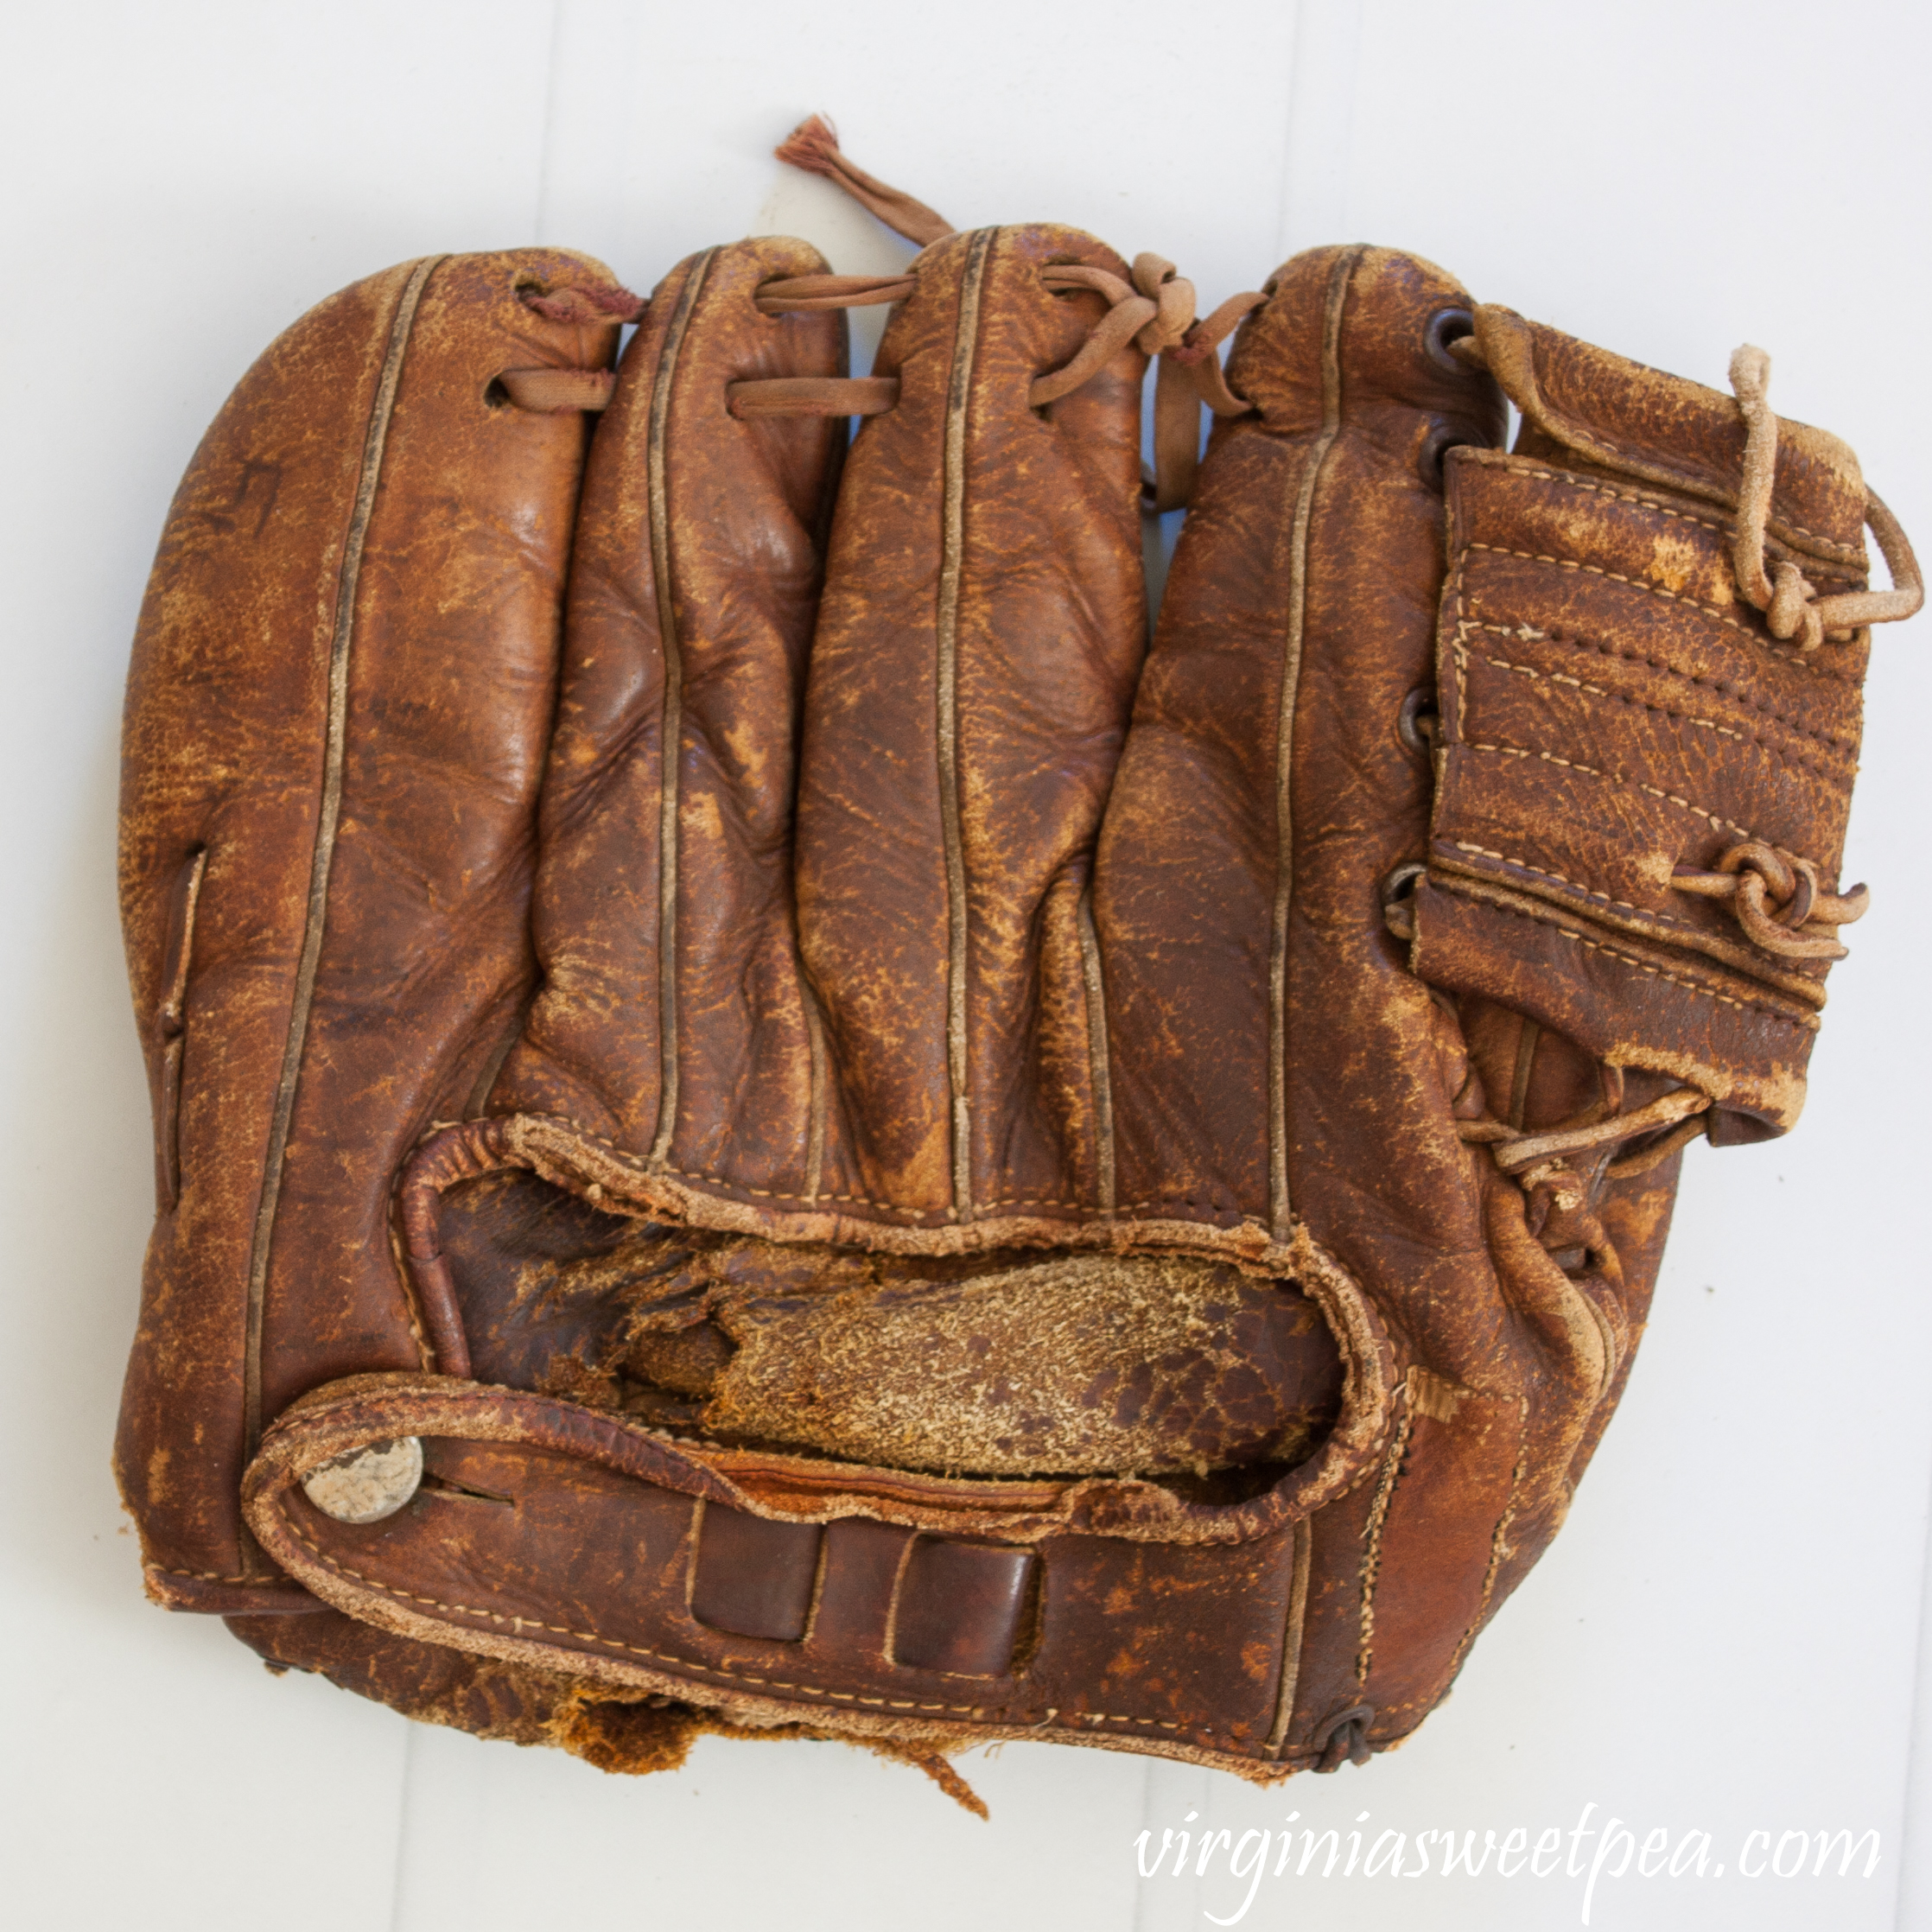 G-H made in Roanoke, Virginia vintage baseball glove most likely from the 1950's.